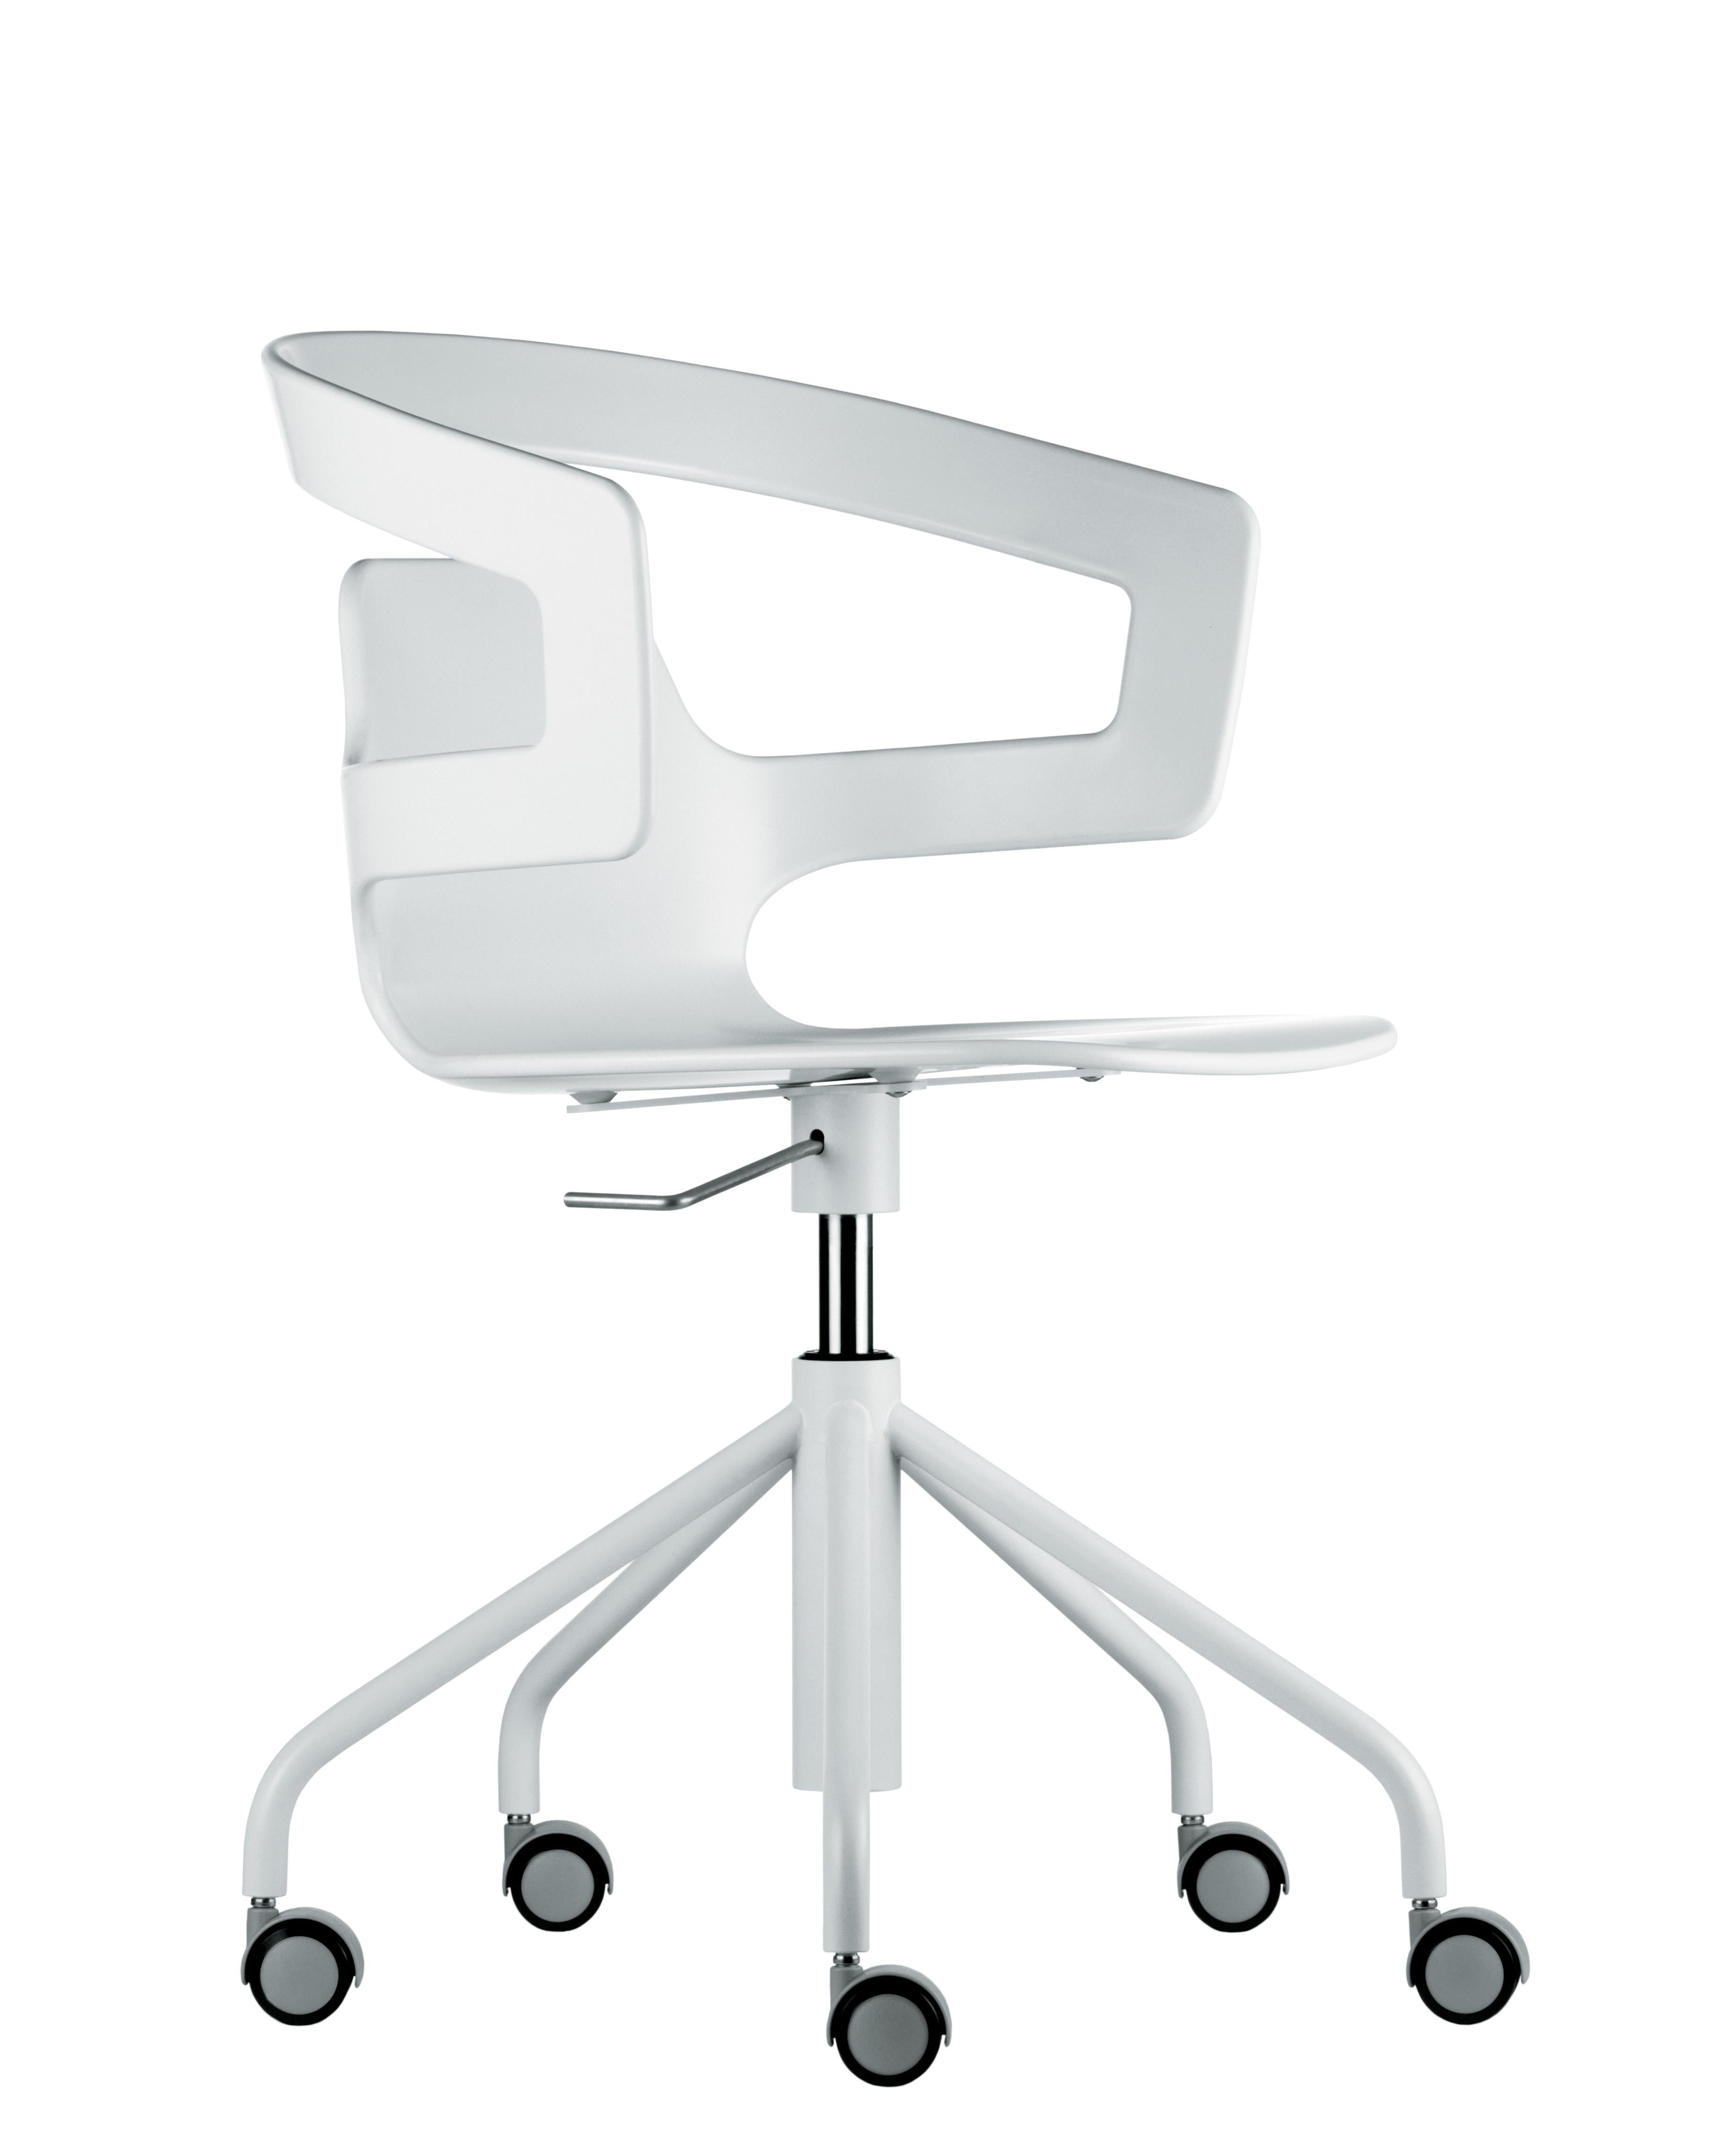 Alias 508 Segesta Studio Chair in White Lacquered Steel Frame by Alfredo Häberli

Height adjustable chair with arms on soft (or hard ***) castors, with 5-star swivel base in lacquered steel; seat and back in solid plastic material.***Â on